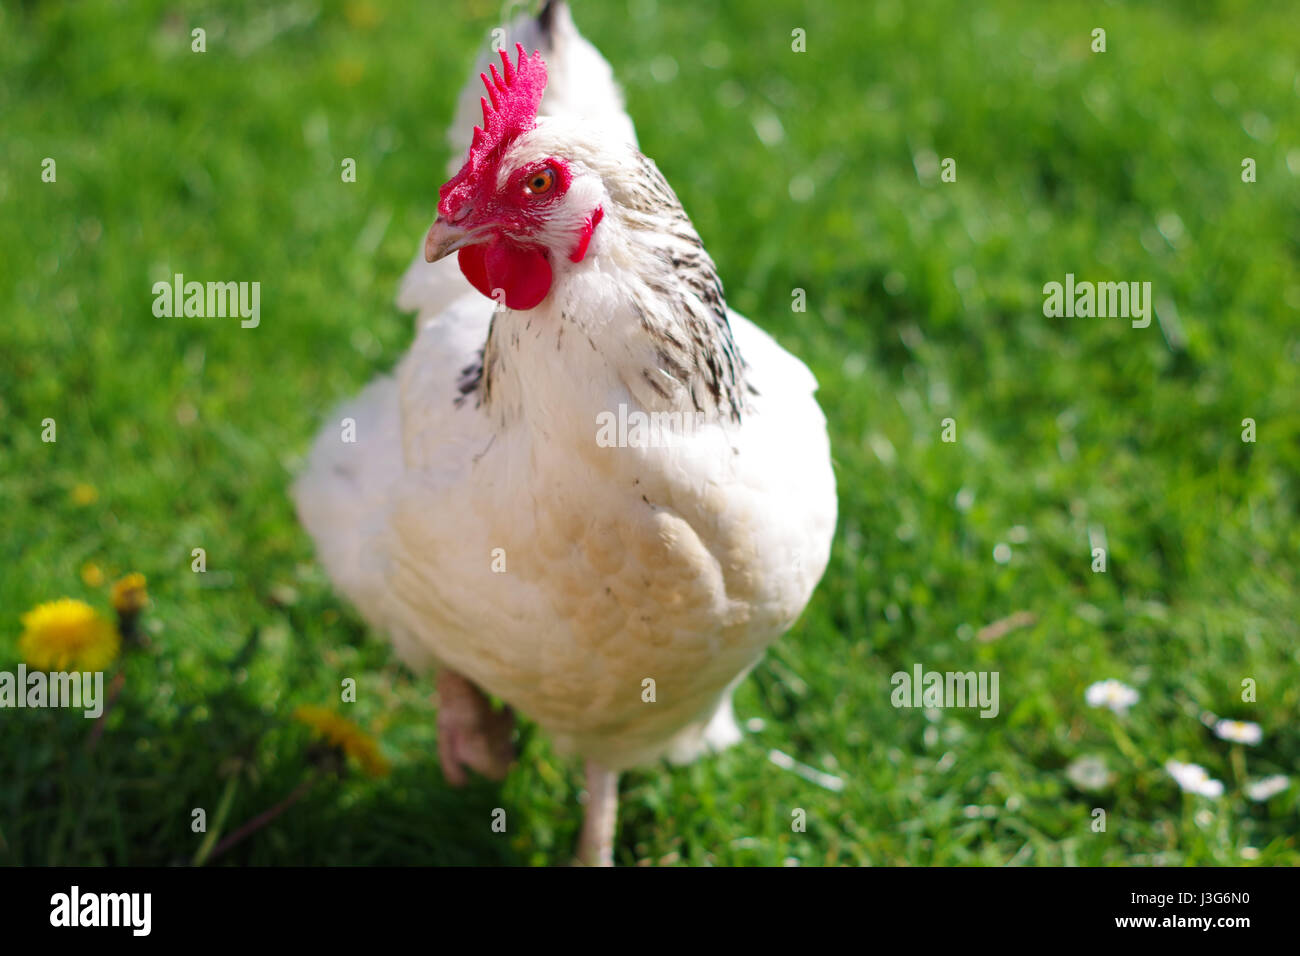 A light sussex hen in a field on a sunny day. Stock Photo